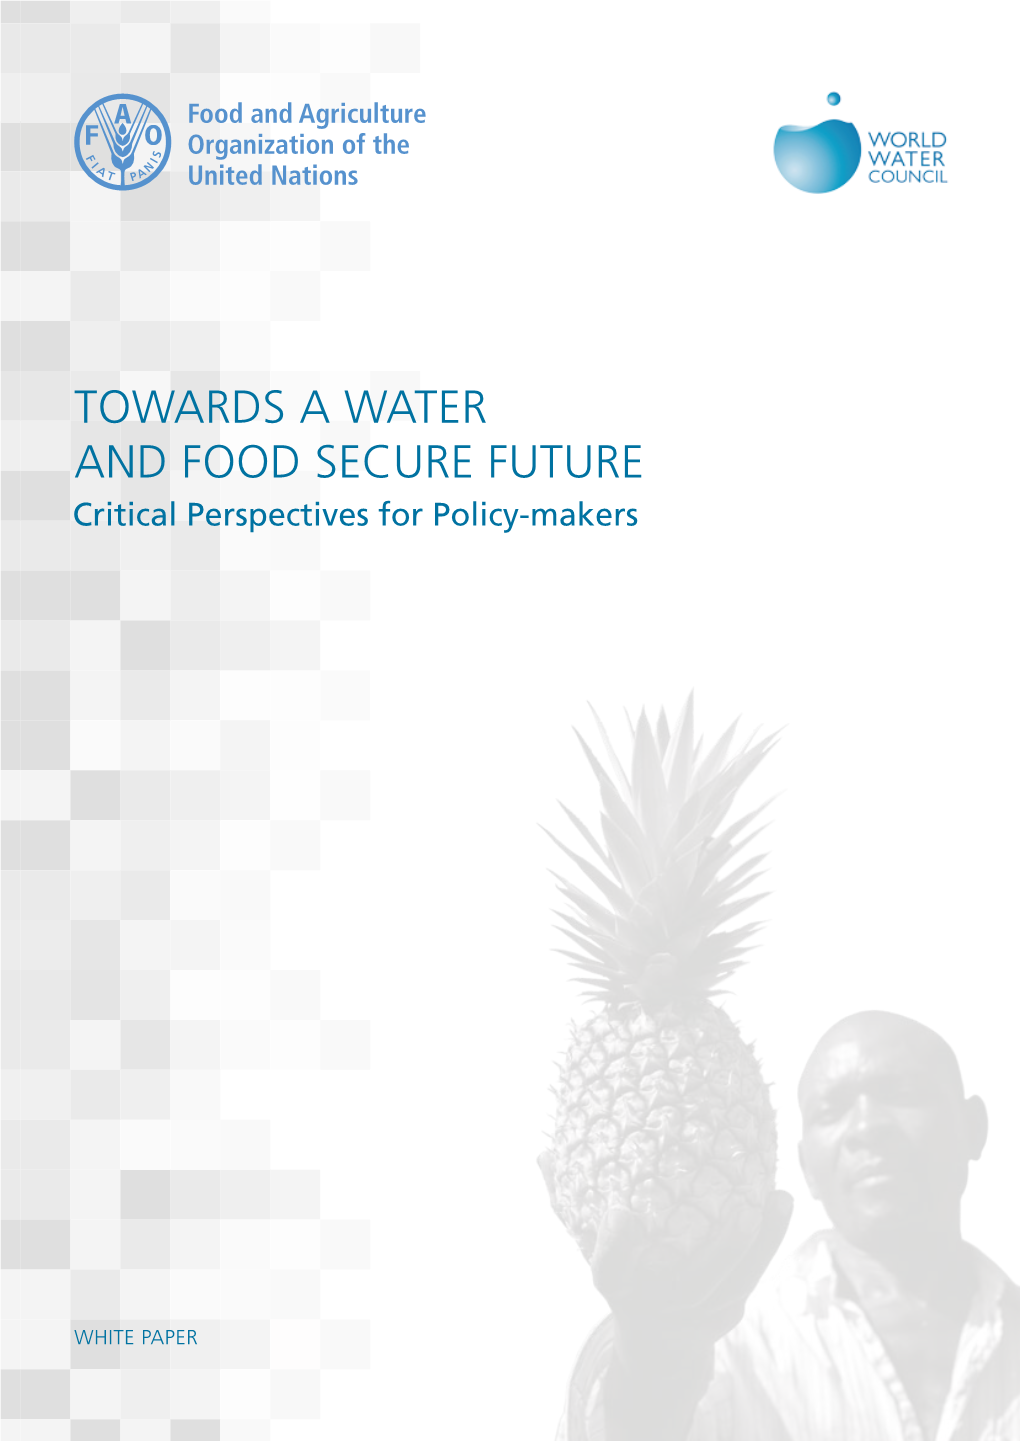 TOWARDS a WATER and FOOD SECURE FUTURE Critical Perspectives for Policy-Makers